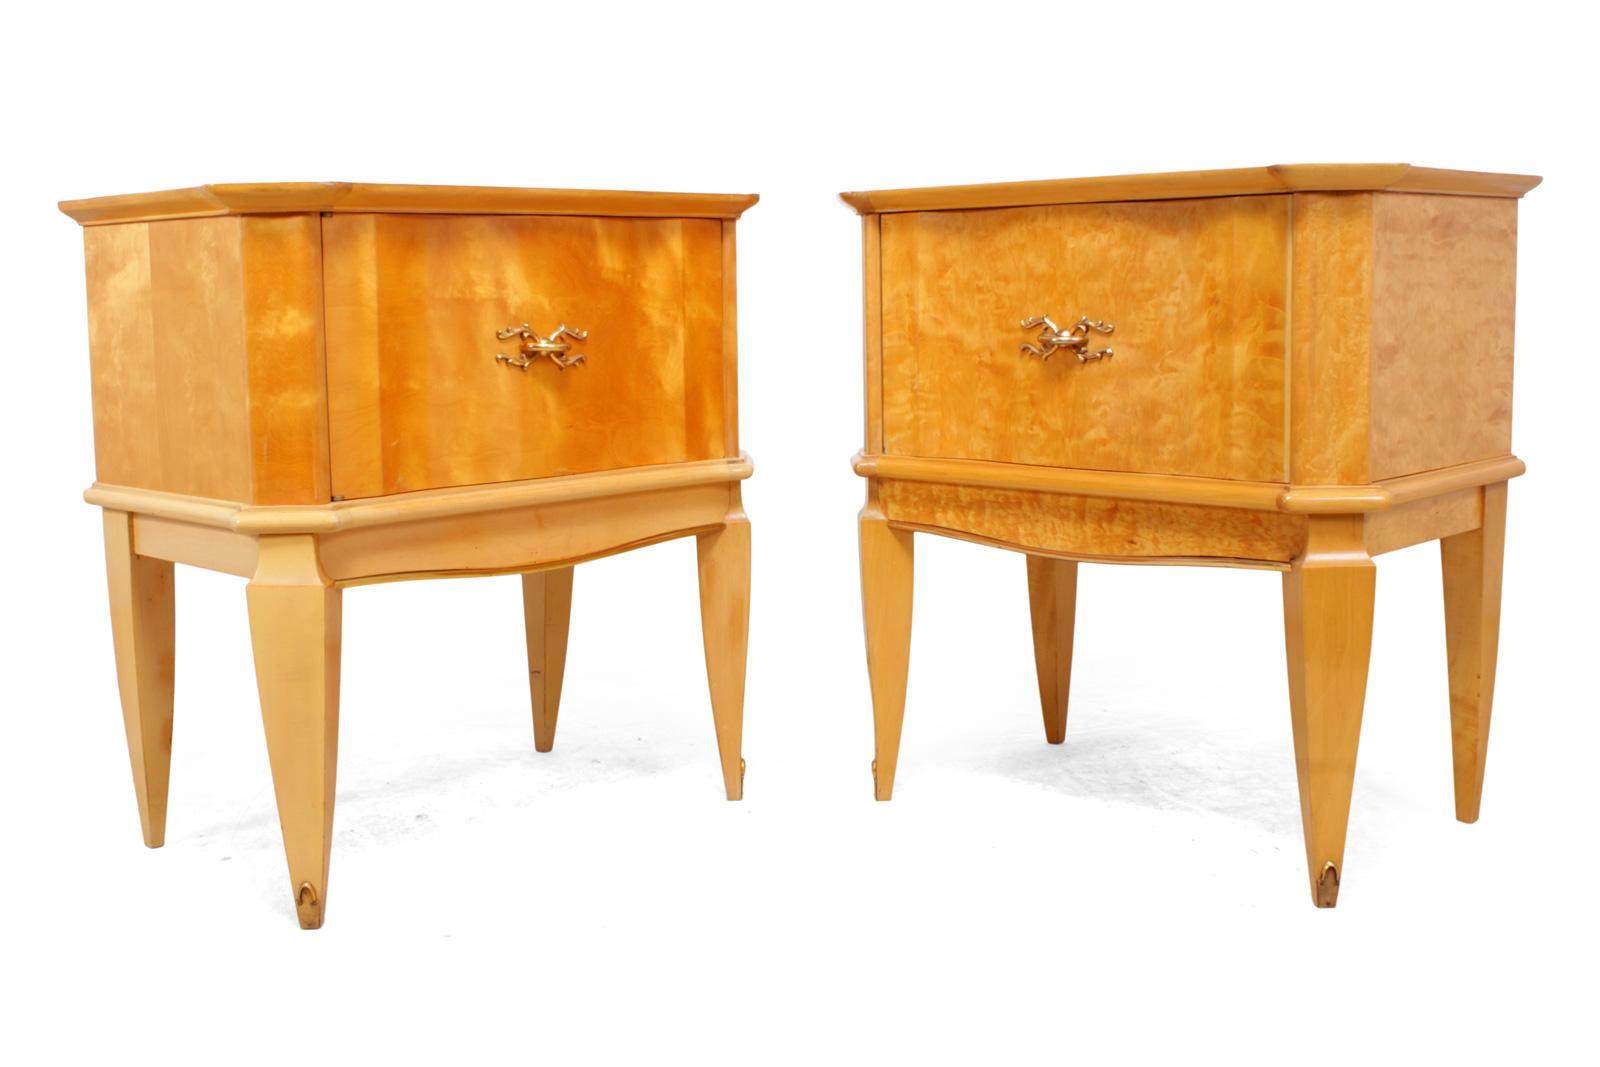 Italian bedside tables in satin birch
A pair of Italian midcentury bedside cabinets with single opposite opening doors, brass handles and feet tips, the bedsides are in very good condition

Age: 1950

Style: Italian

Material: Satin